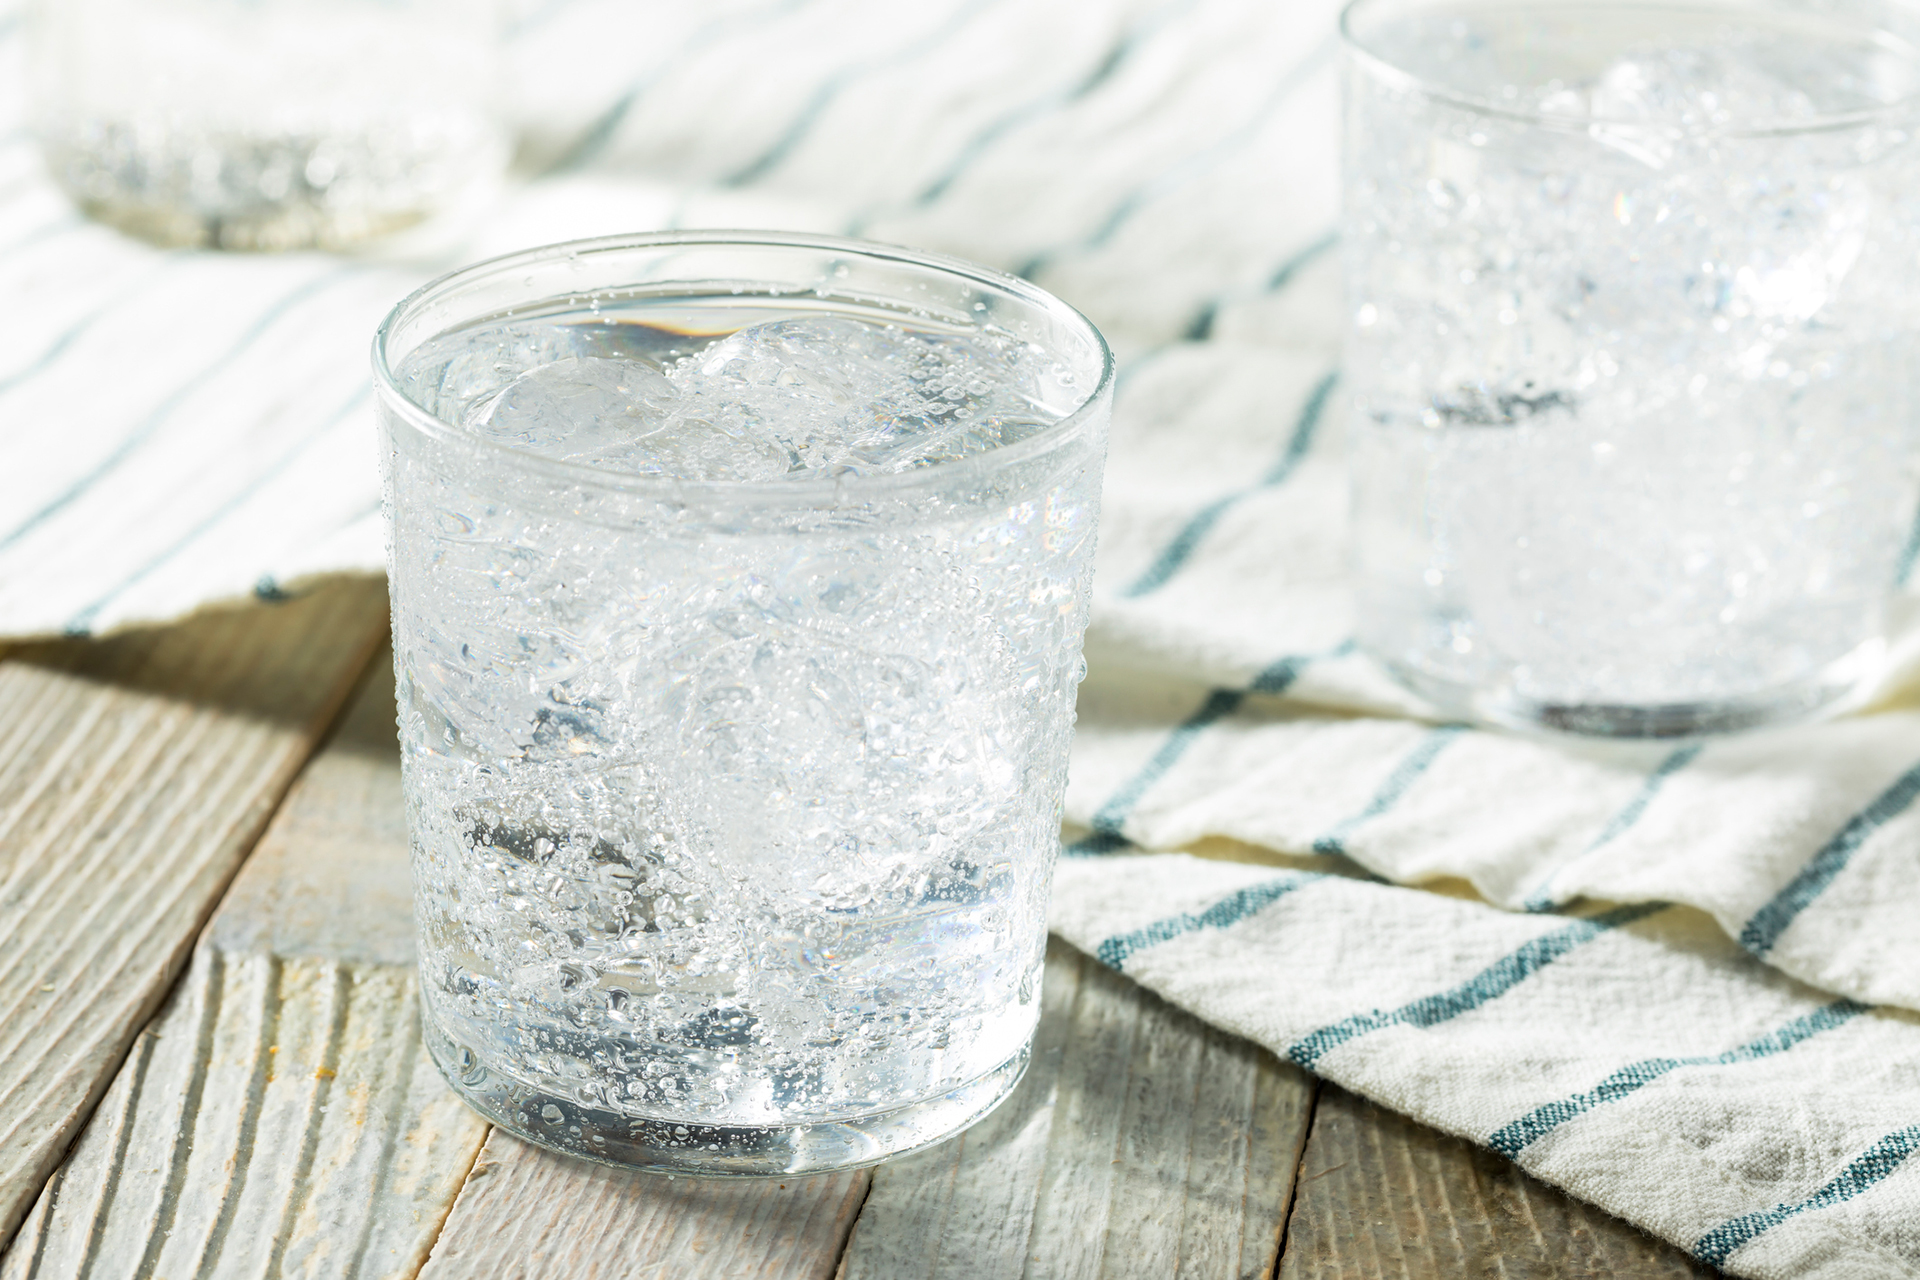 Two glasses of water sitting on a tea towel on a wood surface